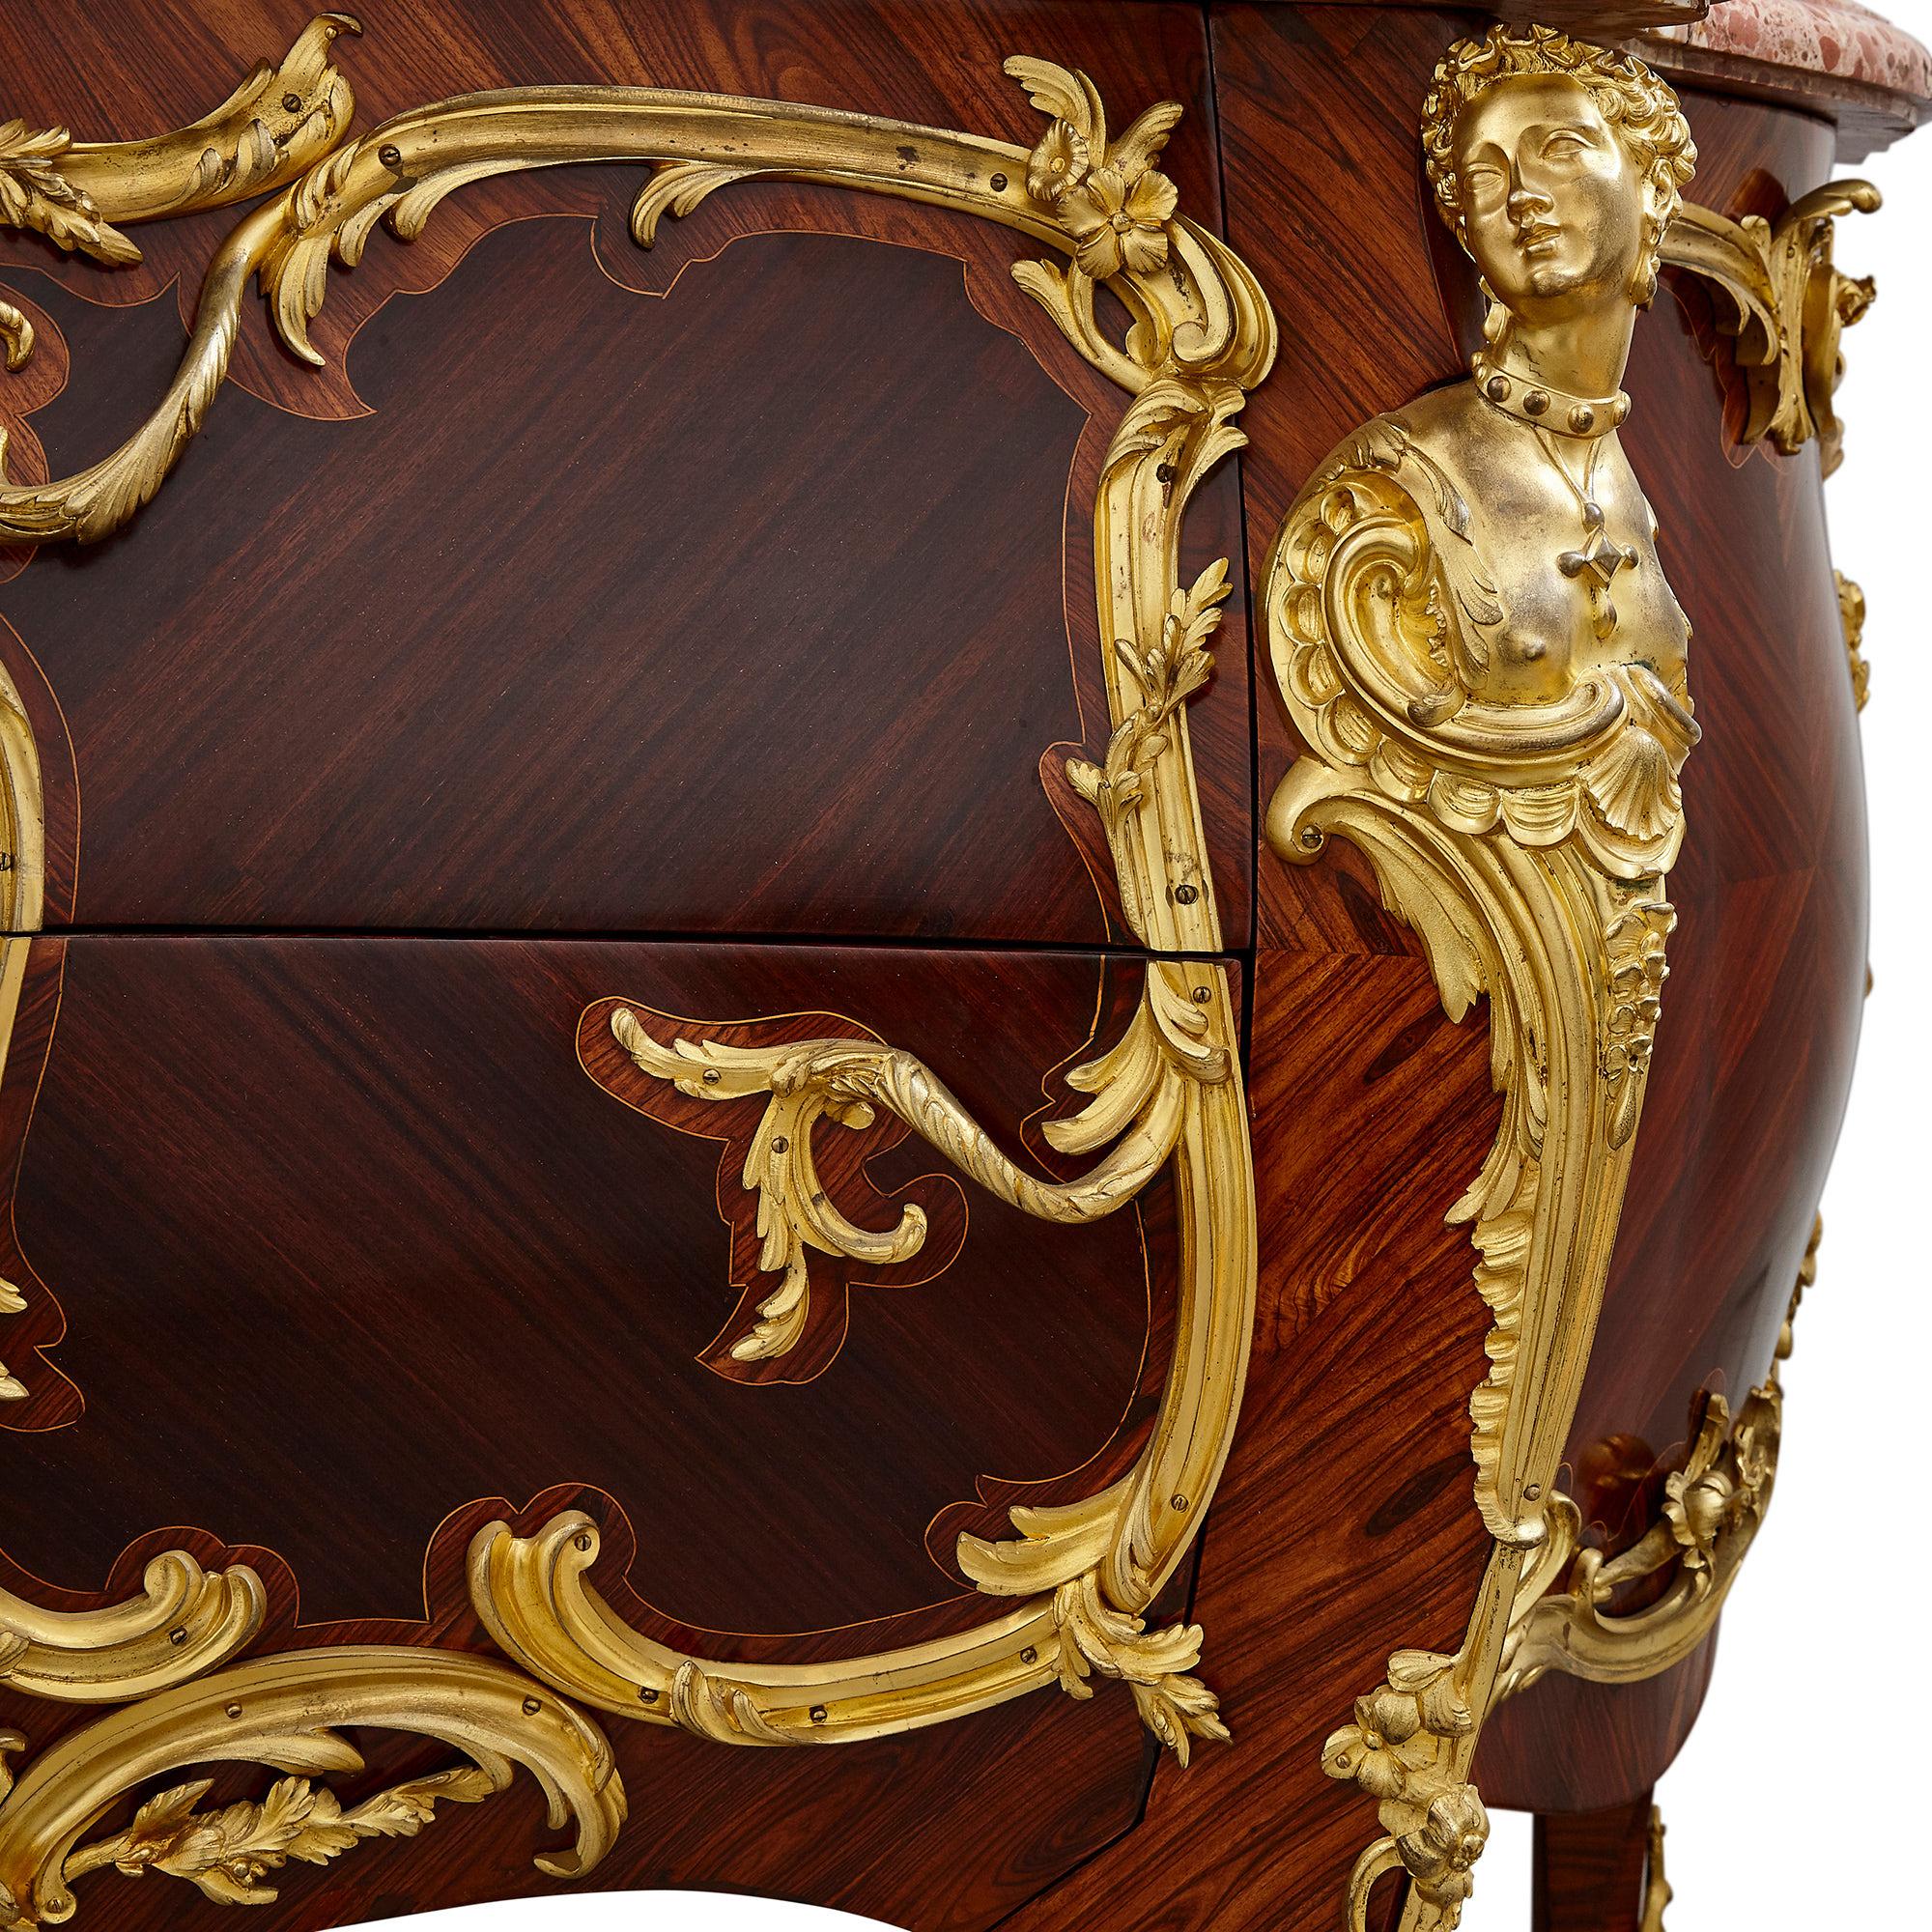 Napoleon III Second Empire Period Ormolu Mounted Commode by Sormani For Sale